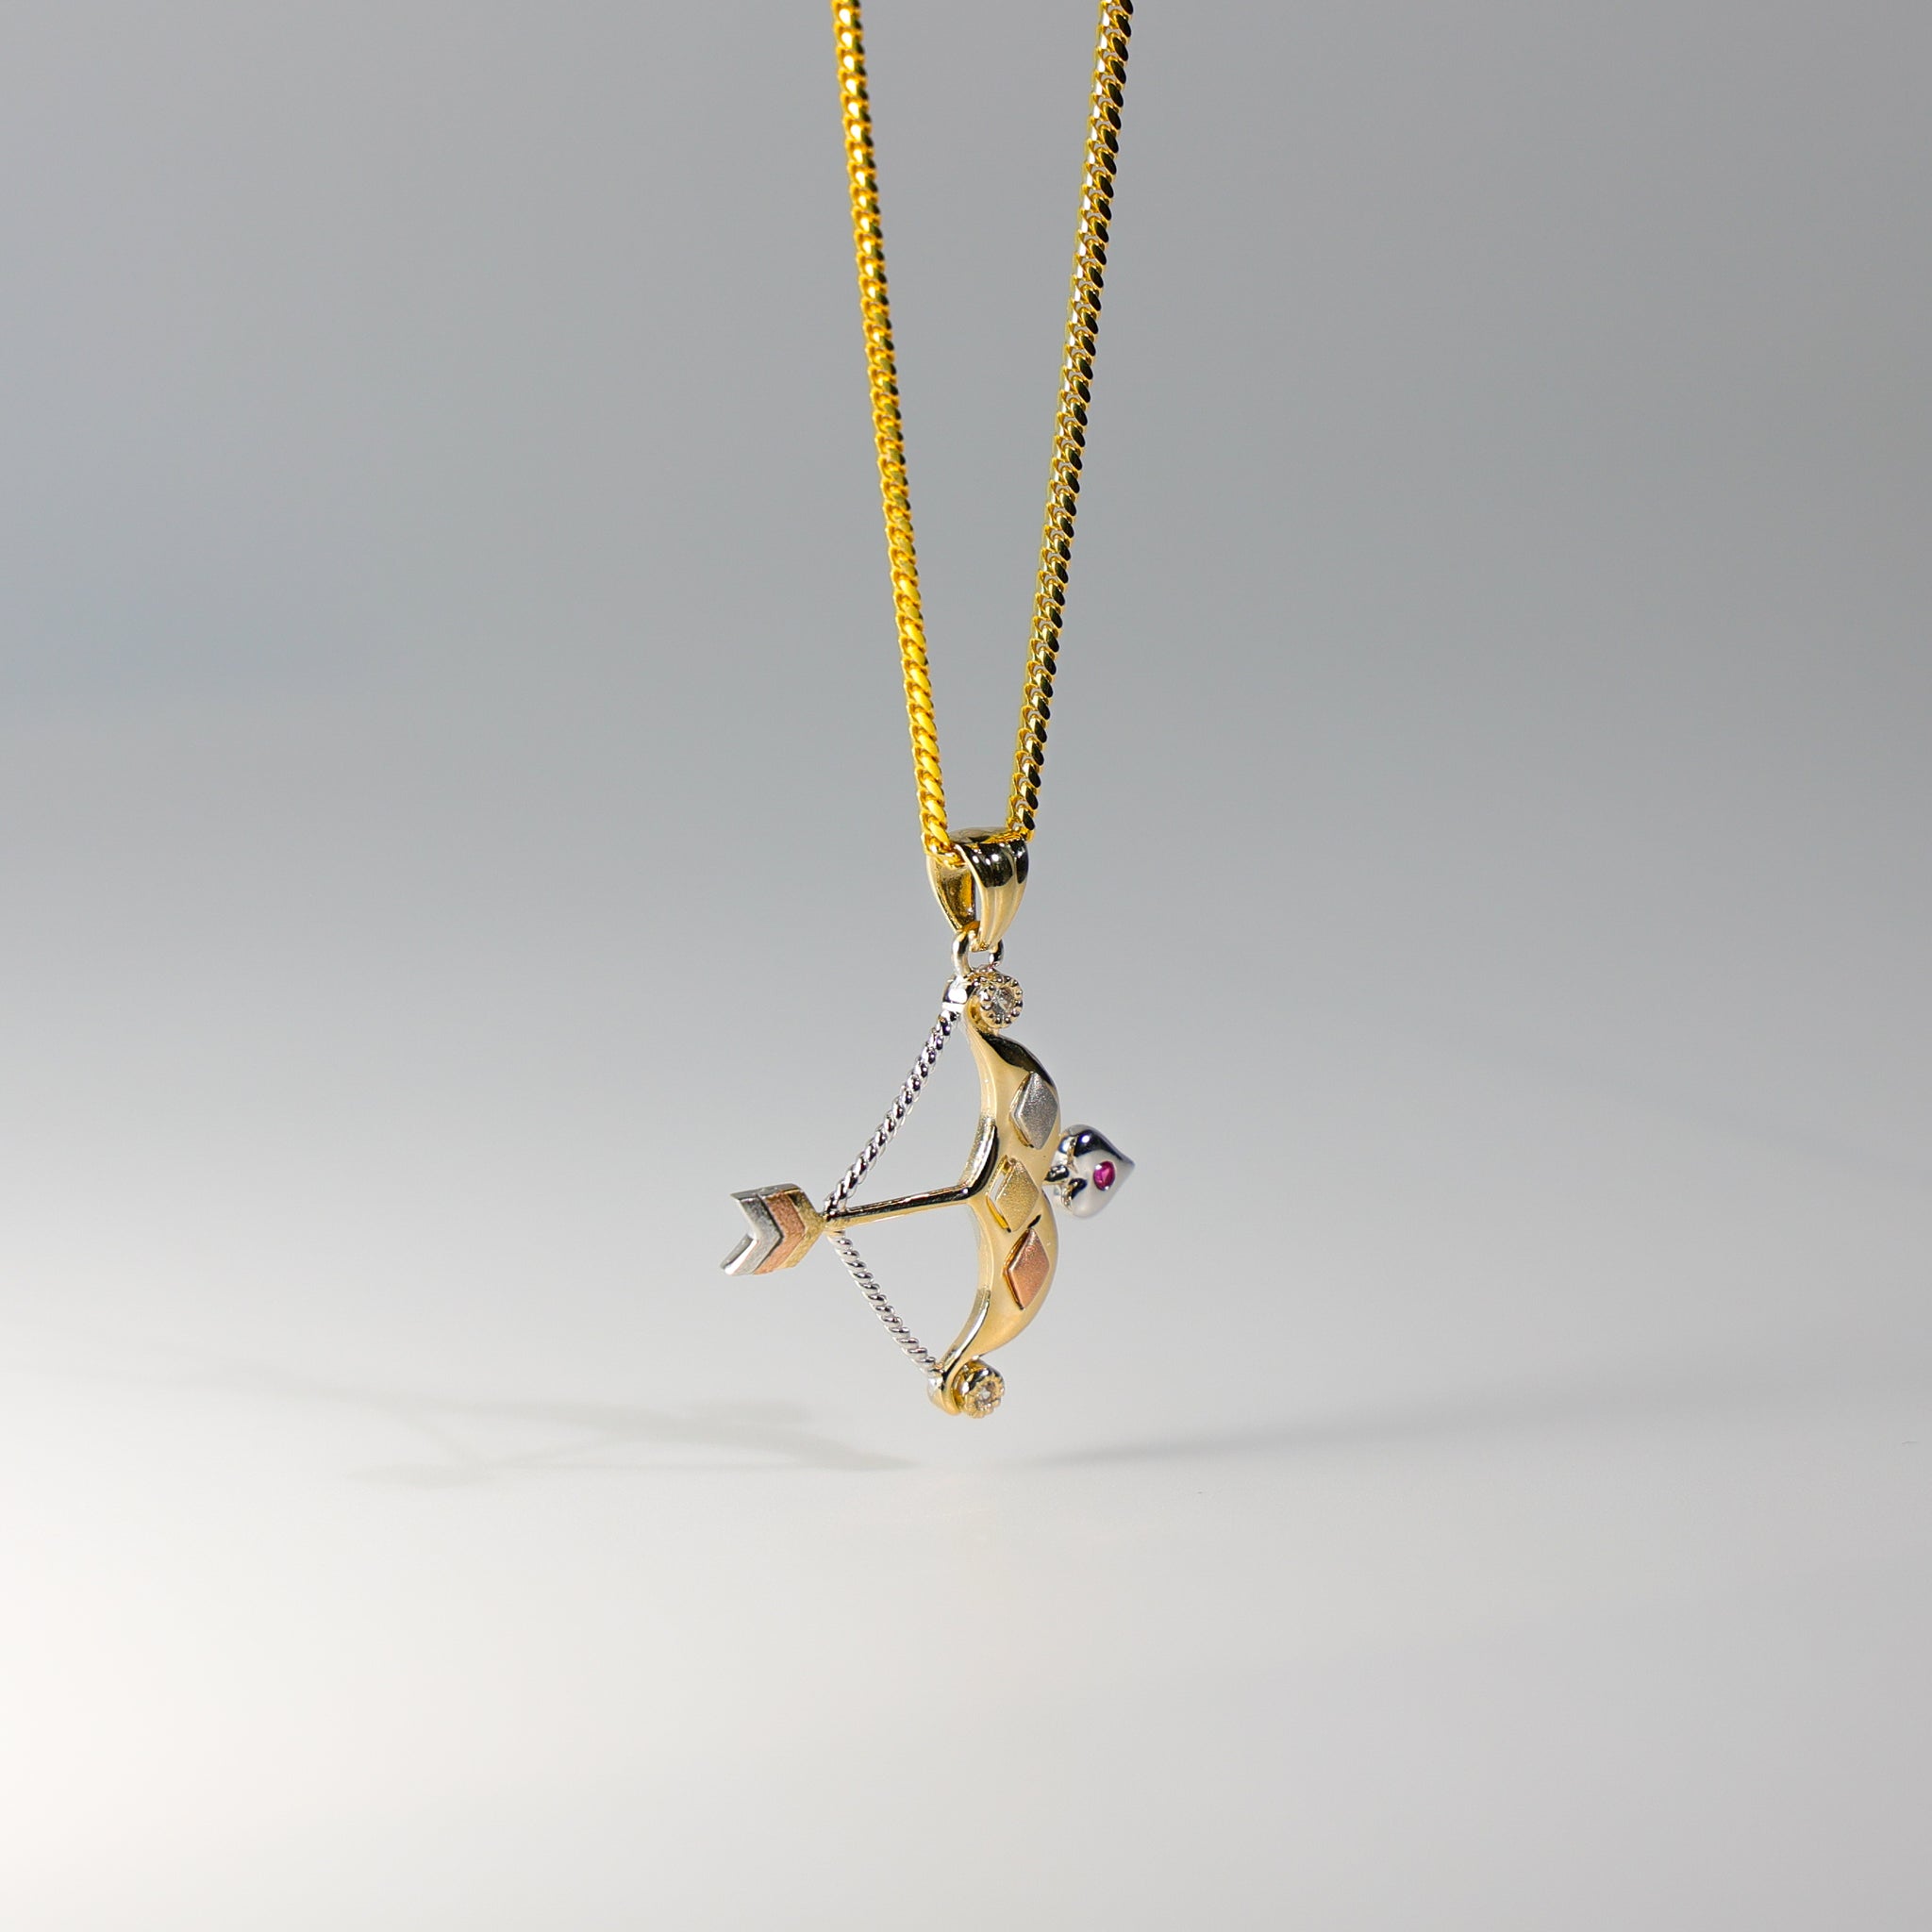 Gold Bow And Arrow Pendant Model-1527 - Charlie & Co. Jewelry